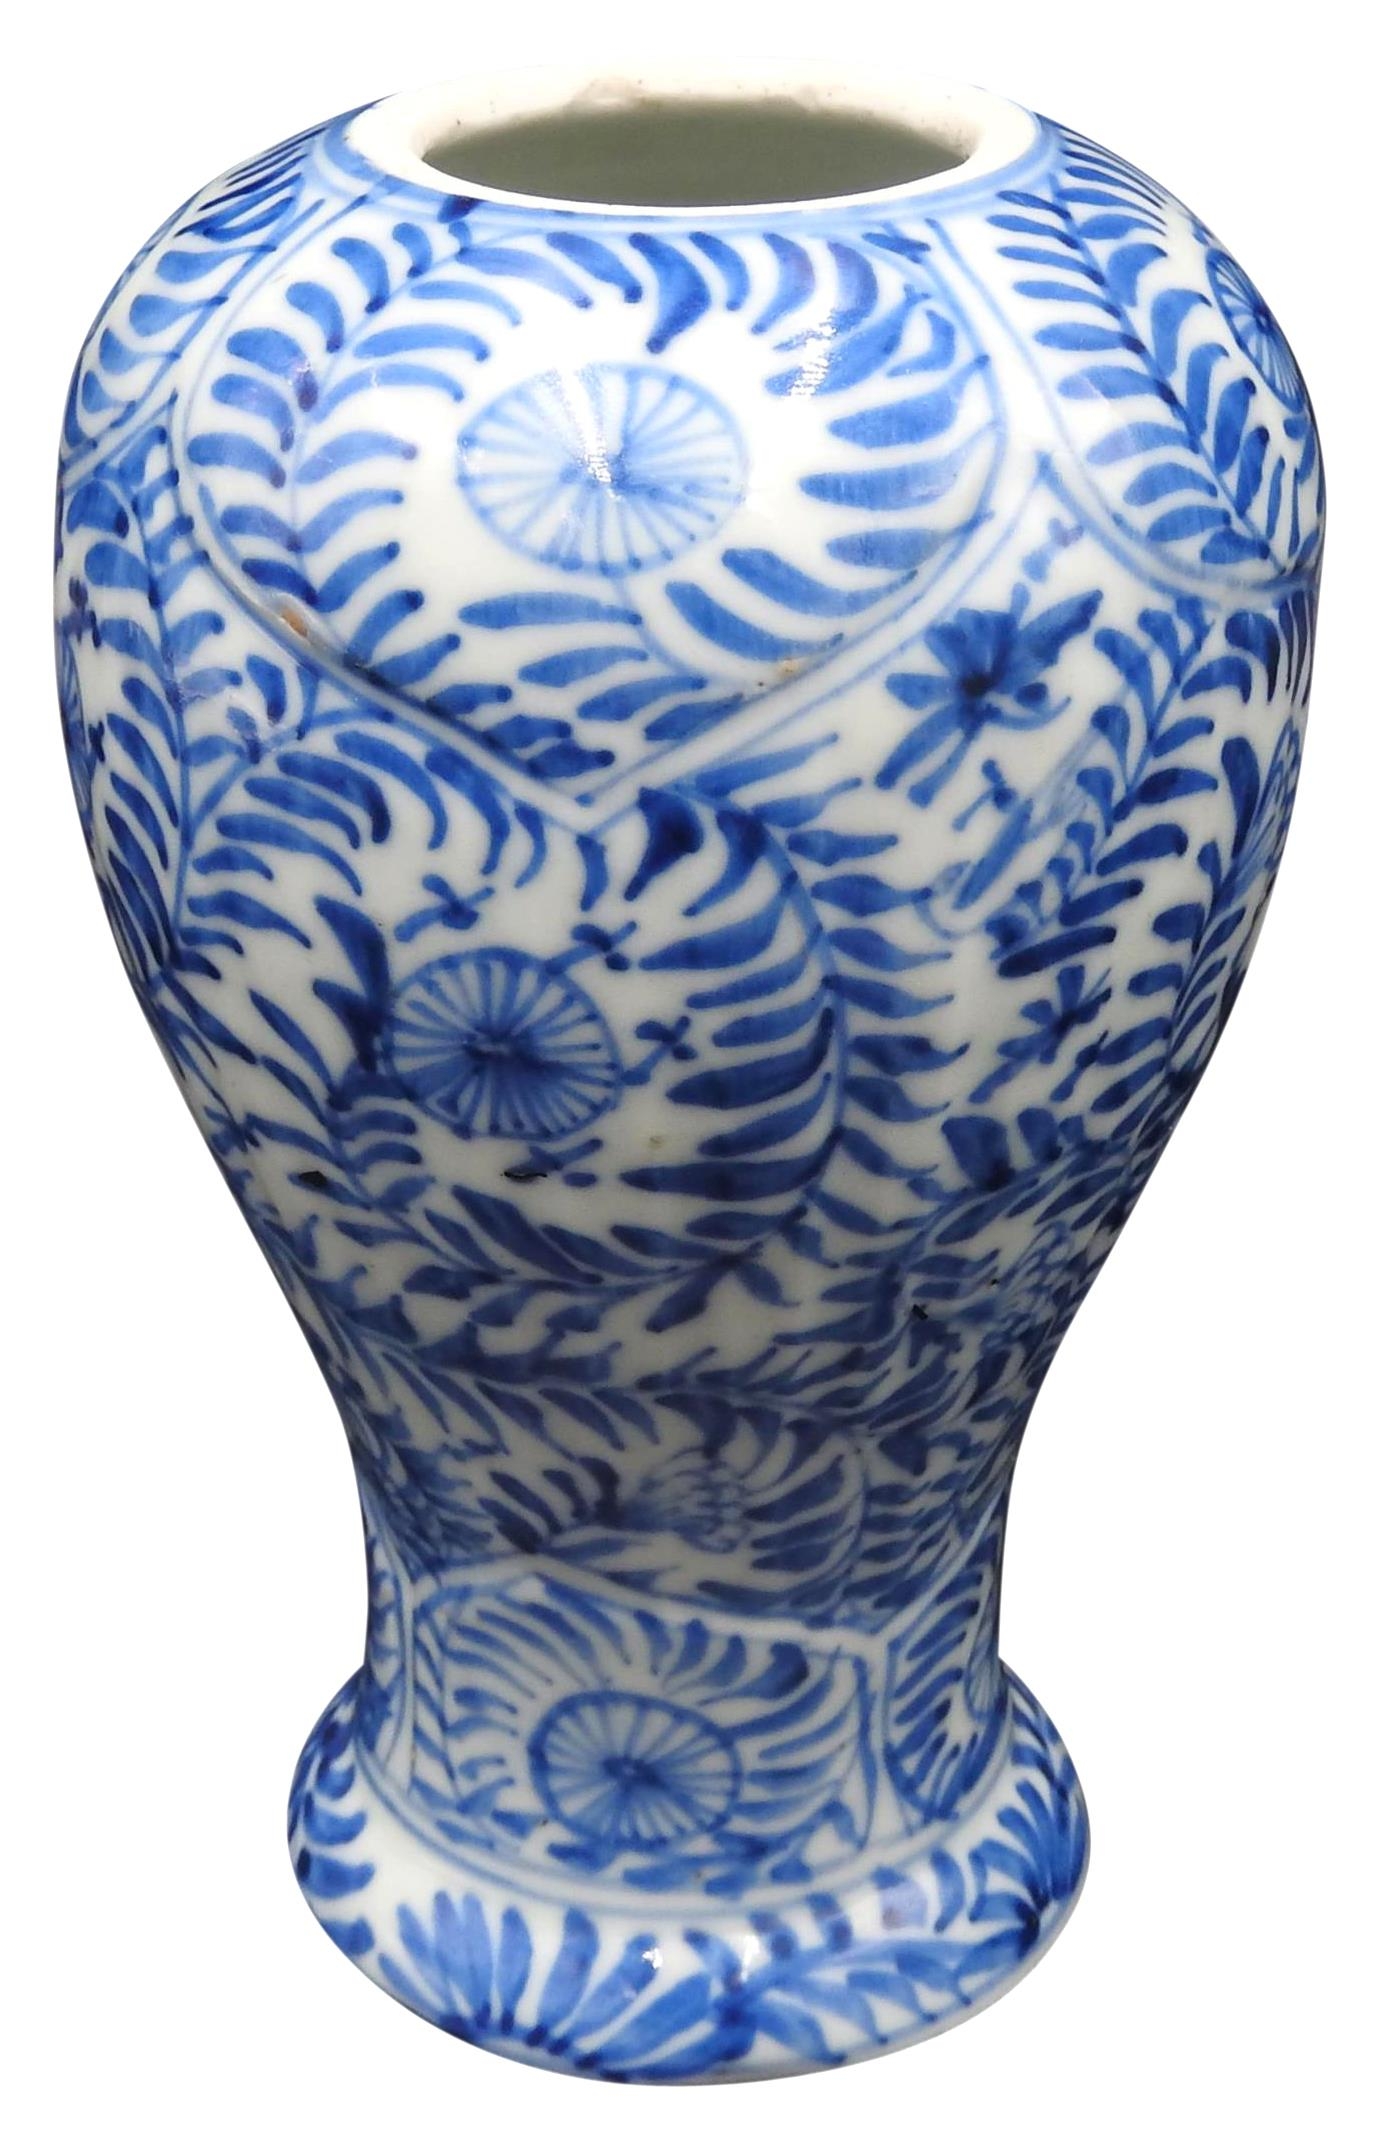 A BLUE AND WHITE MEIPING VASE, QING DYNASTY, LATE 18TH / EARLY 19TH CENTURY